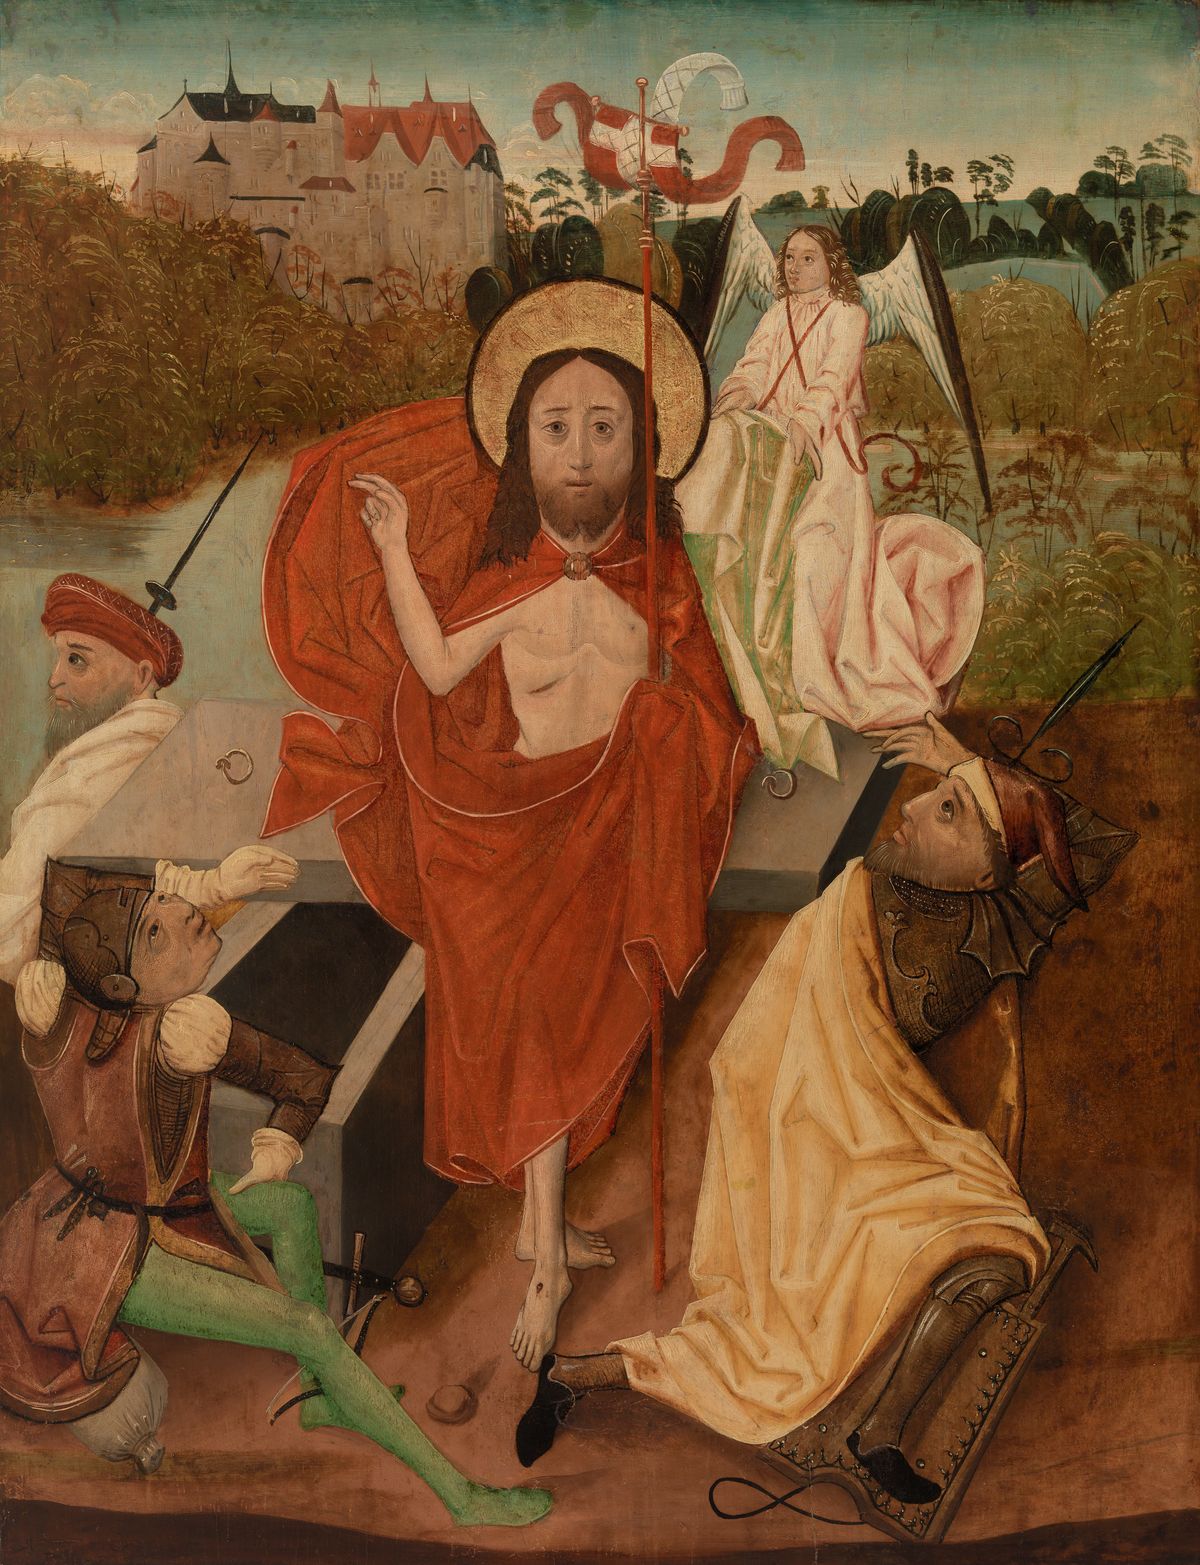 The Resurrection (15th Century, German) by Unidentified Artist - Public Domain Bible Painting